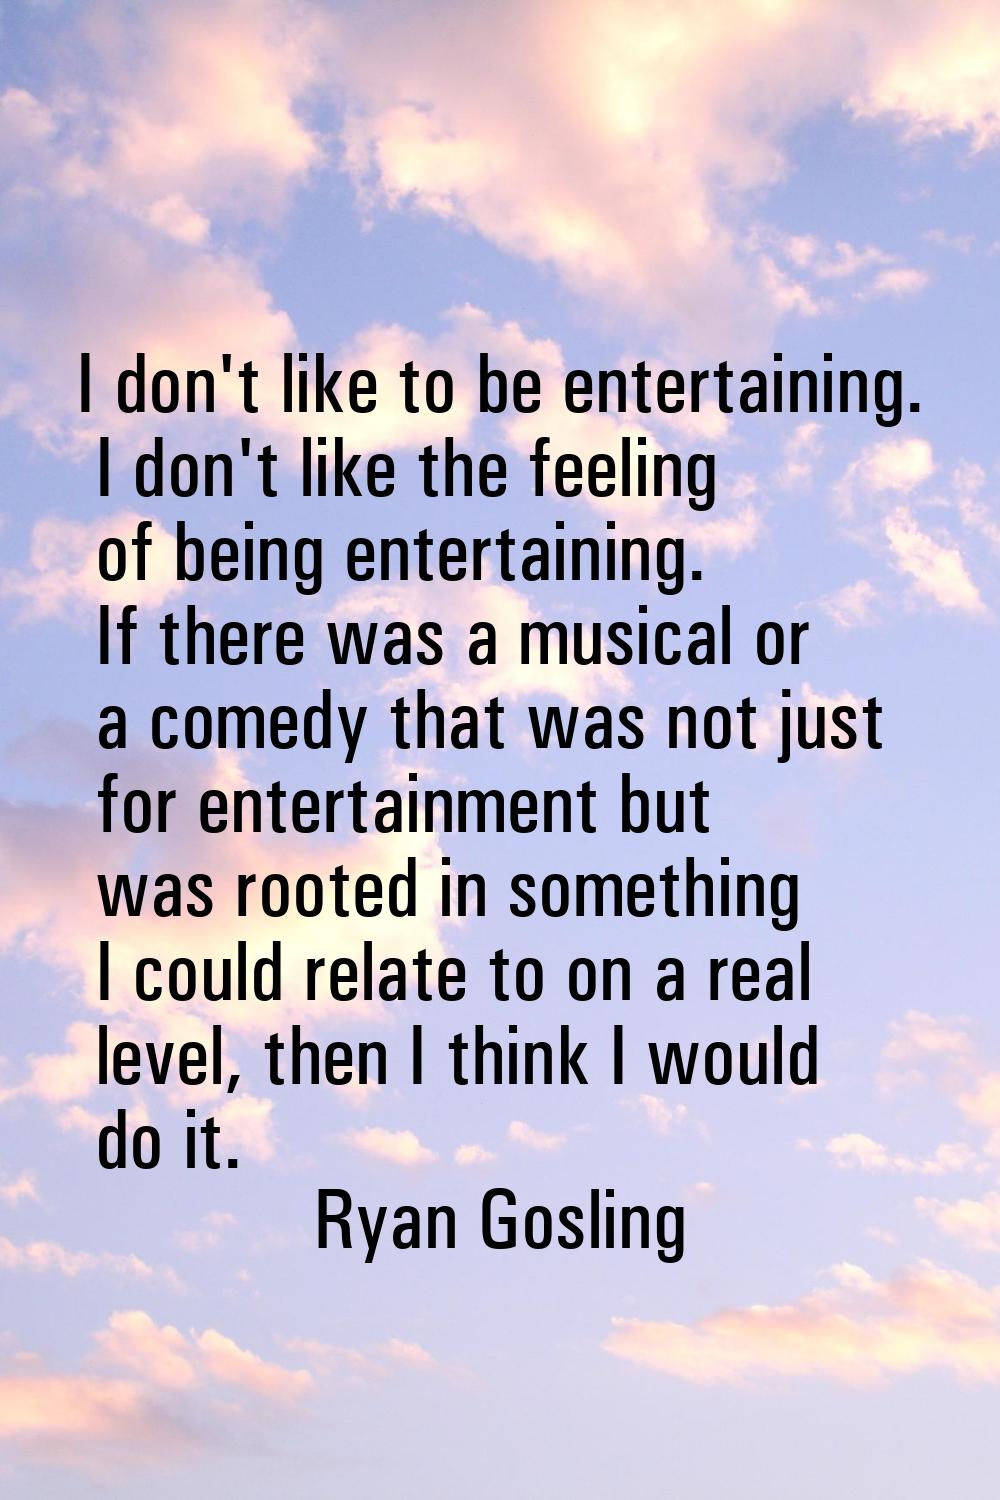 I don't like to be entertaining. I don't like the feeling of being entertaining. If there was a mus